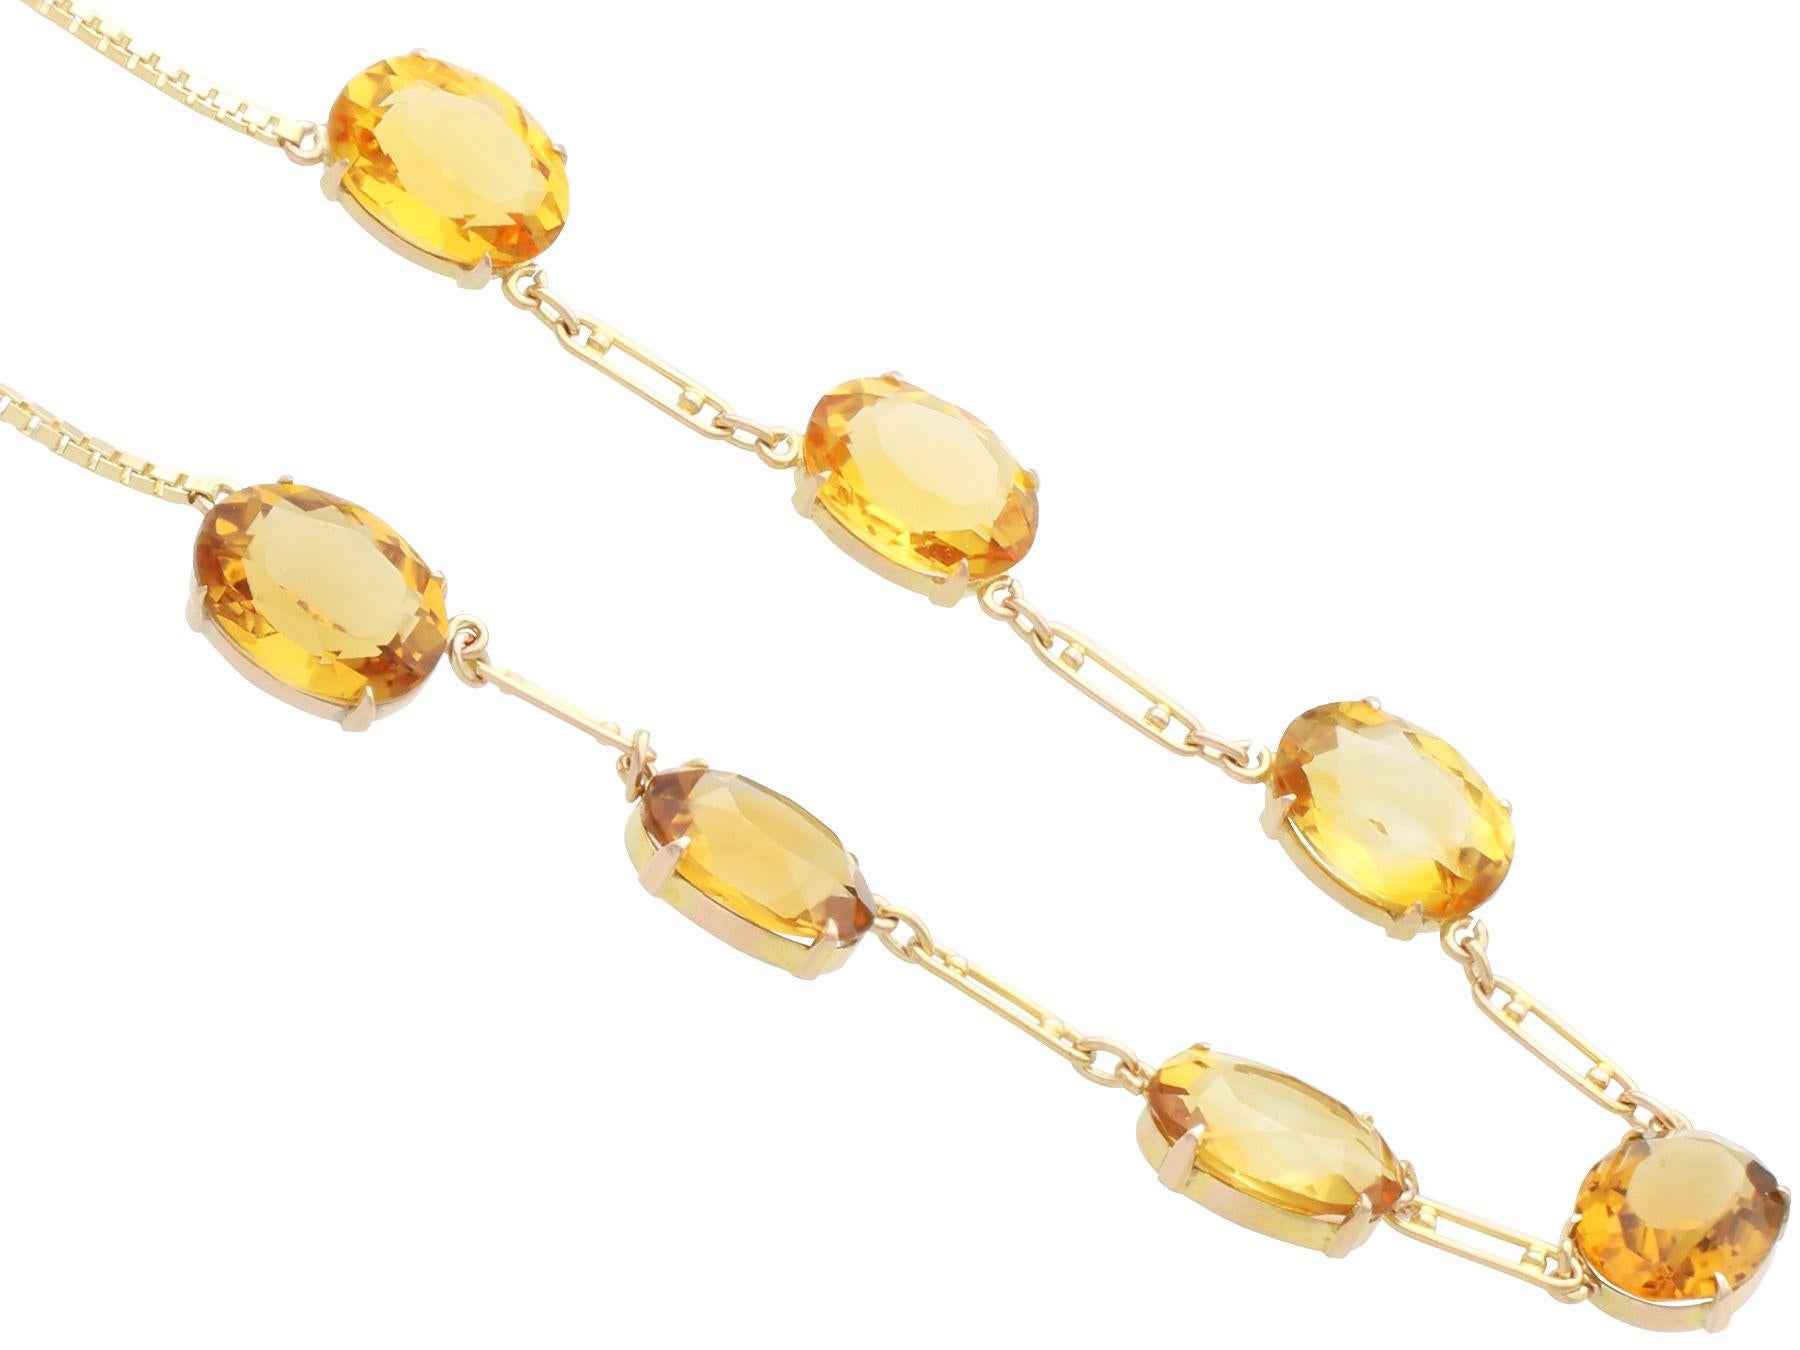 Vintage 24.57ct Citrine and 9ct Yellow Gold Necklace In Excellent Condition For Sale In Jesmond, Newcastle Upon Tyne